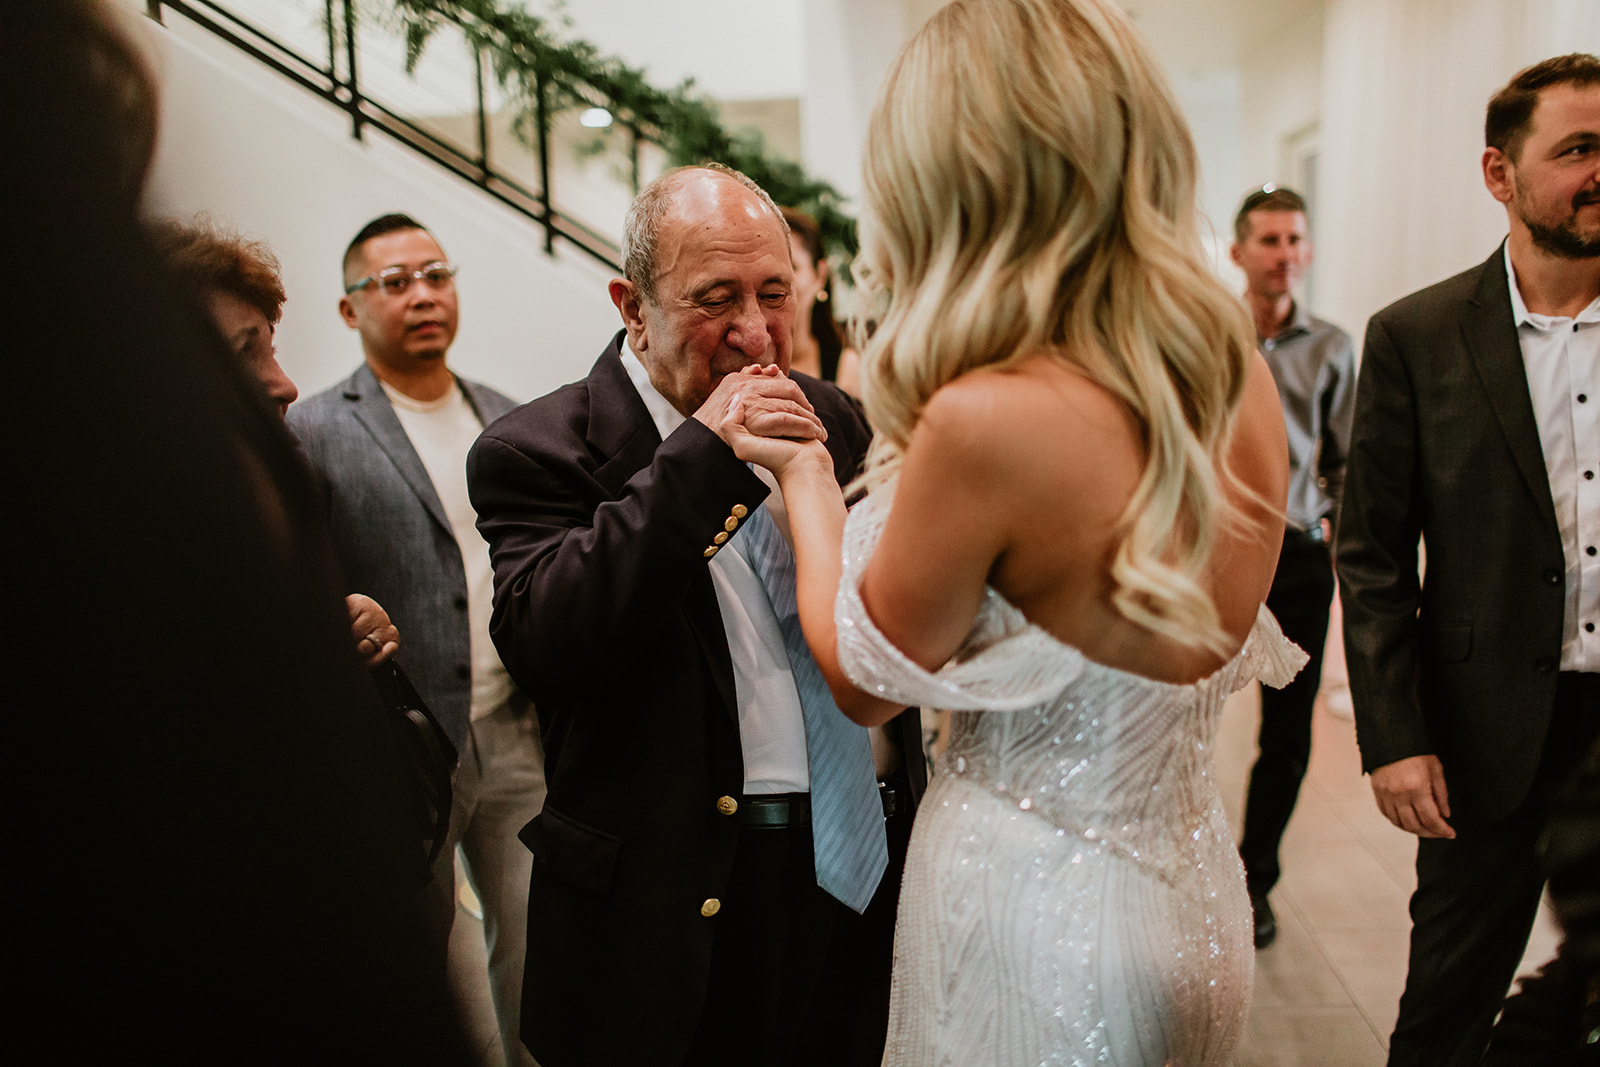 Guest Kissing Brides Hand at Cocktail Hour 